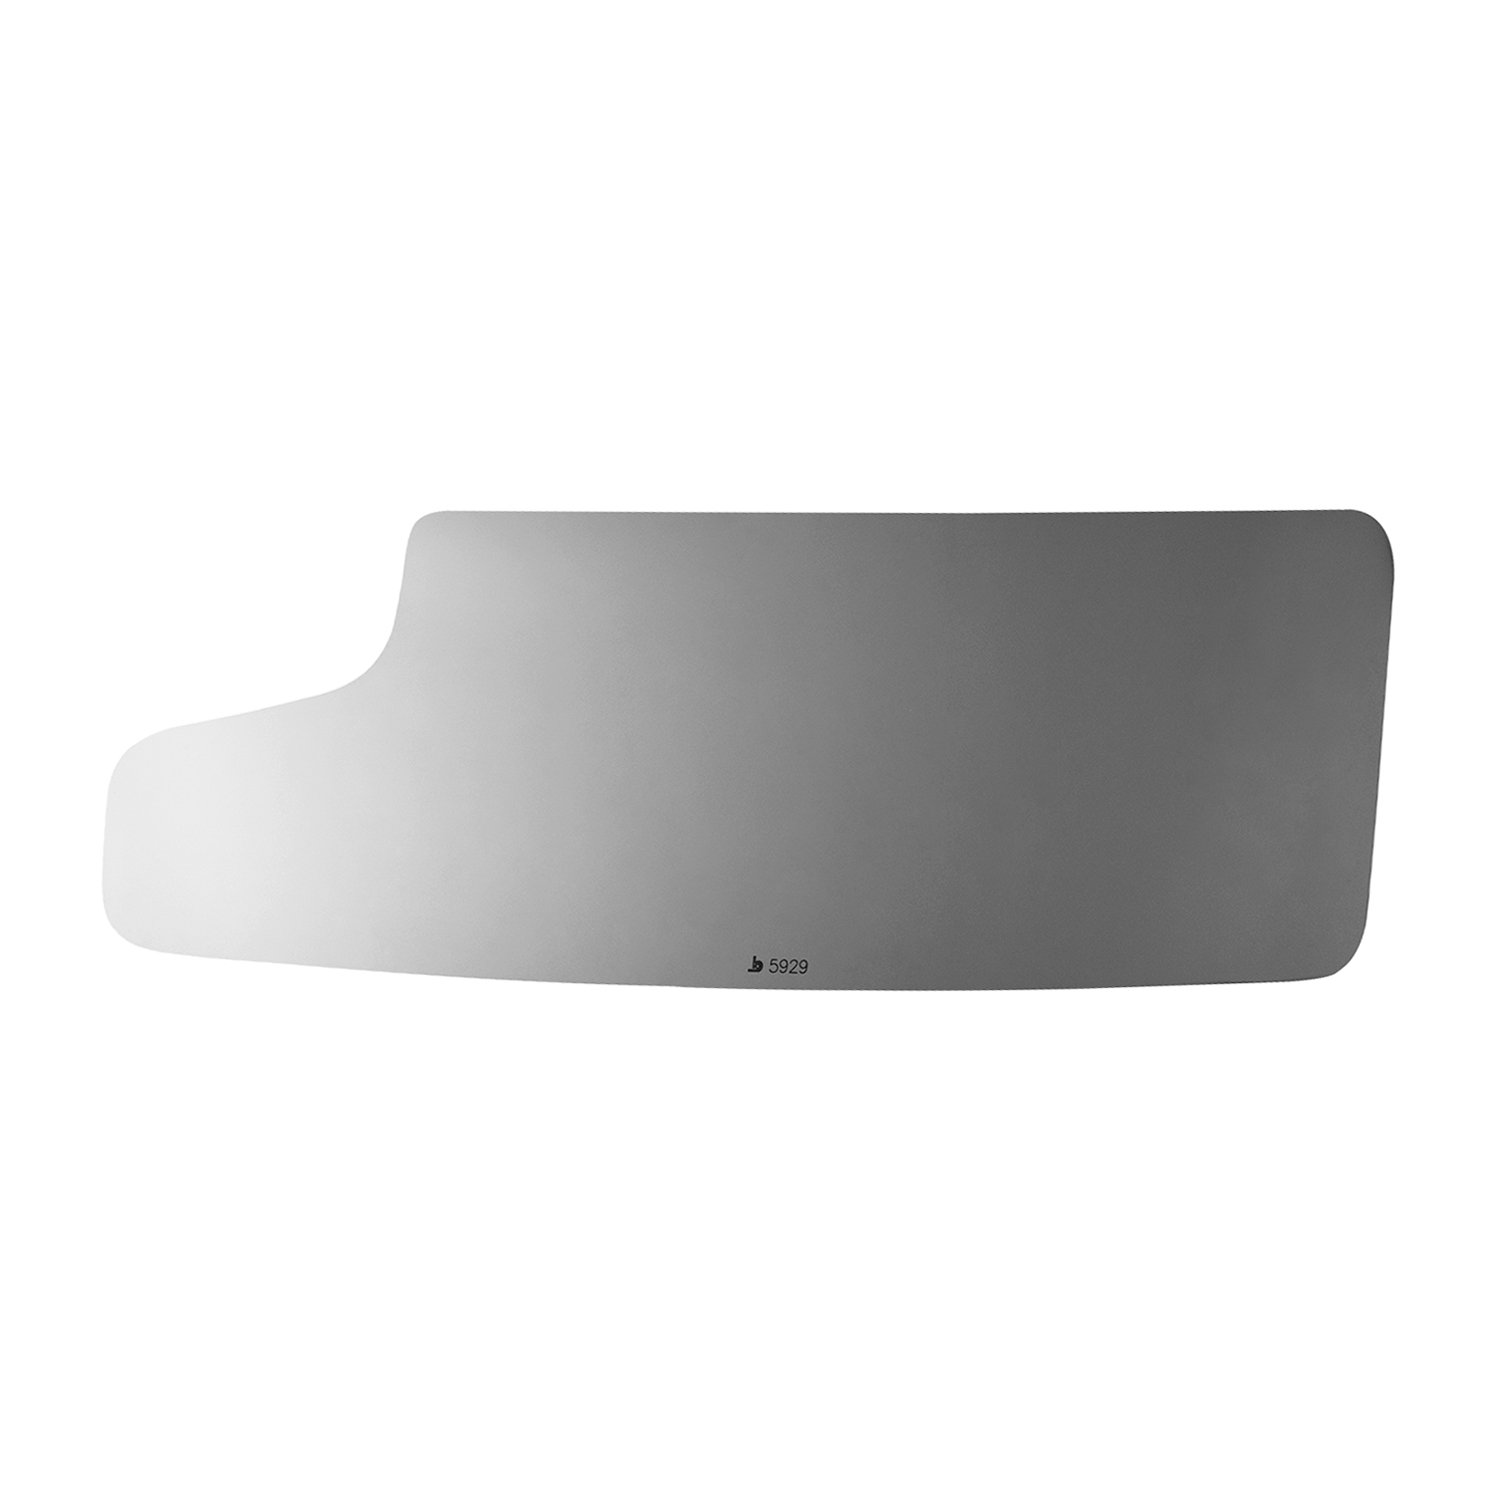 5929 SIDE VIEW MIRROR